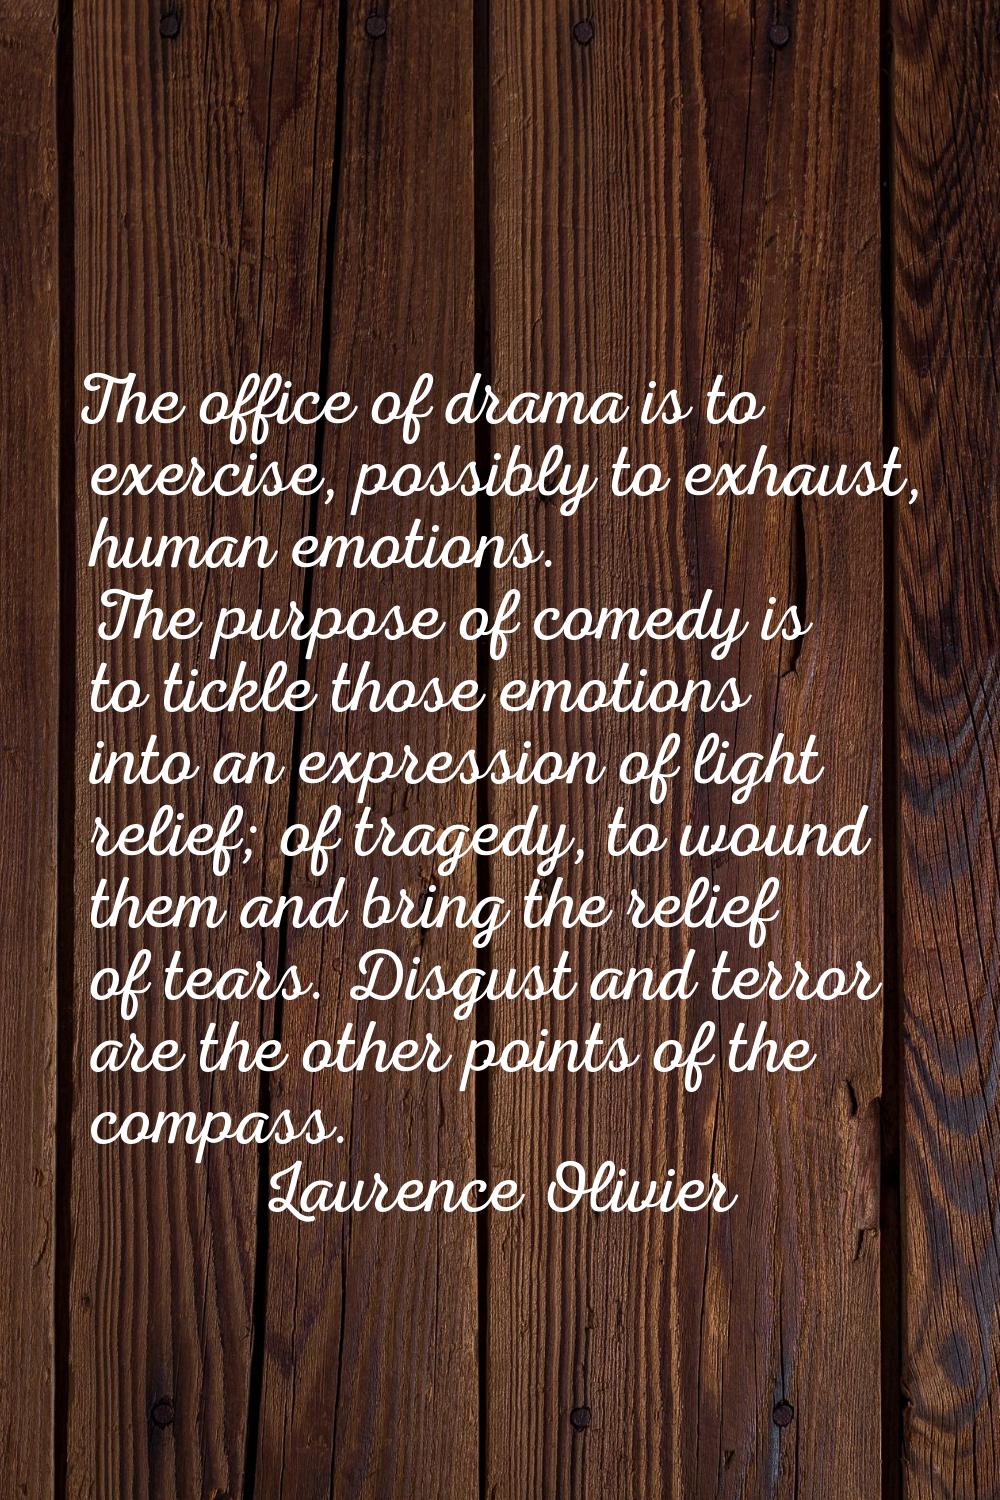 The office of drama is to exercise, possibly to exhaust, human emotions. The purpose of comedy is t